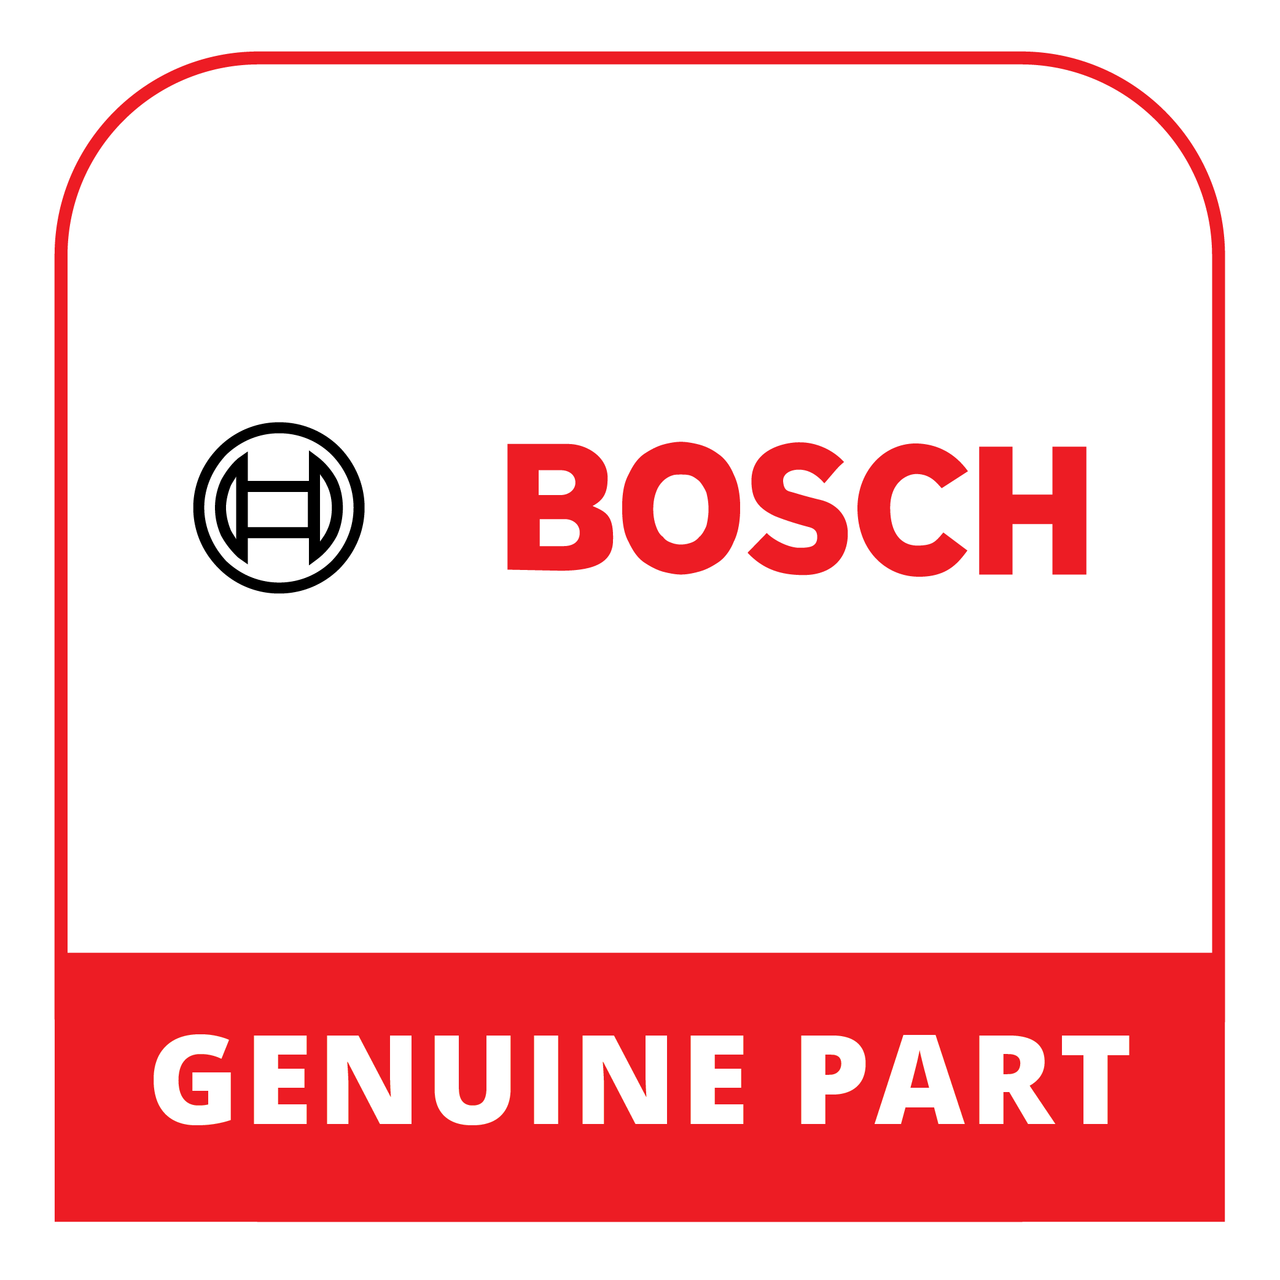 Bosch (Thermador) 12028961 - Power Module Programmed - Genuine Bosch (Thermador) Part